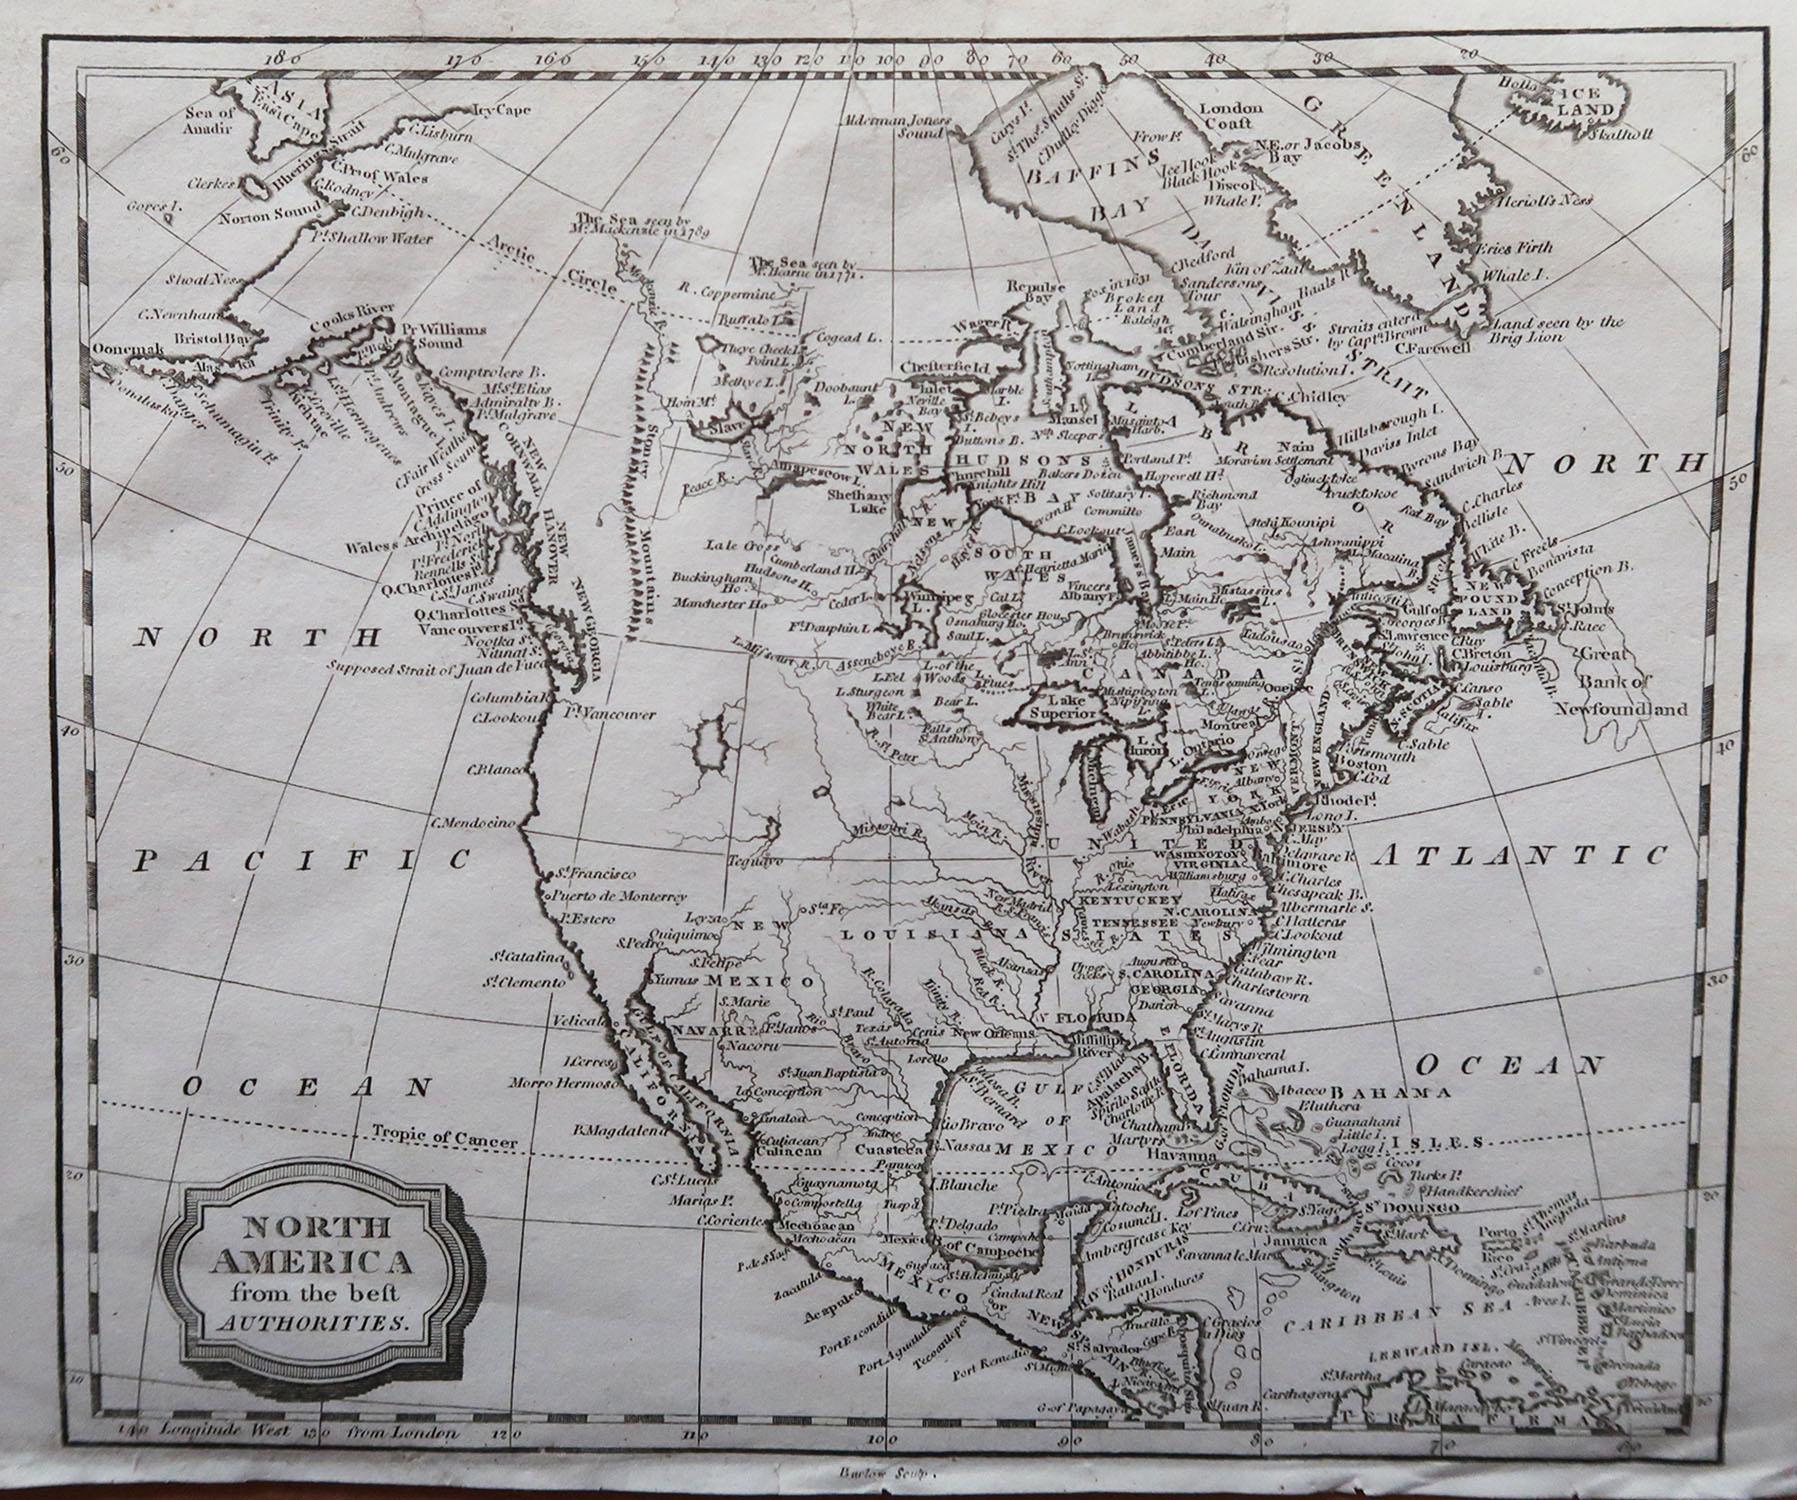 Great map of North America

Copper-plate engraving by Barlow

Published by Brightly & Kinnersly, Bungay, Suffolk. 1806

Unframed.

Repairs to a minor edge tears on top edge.